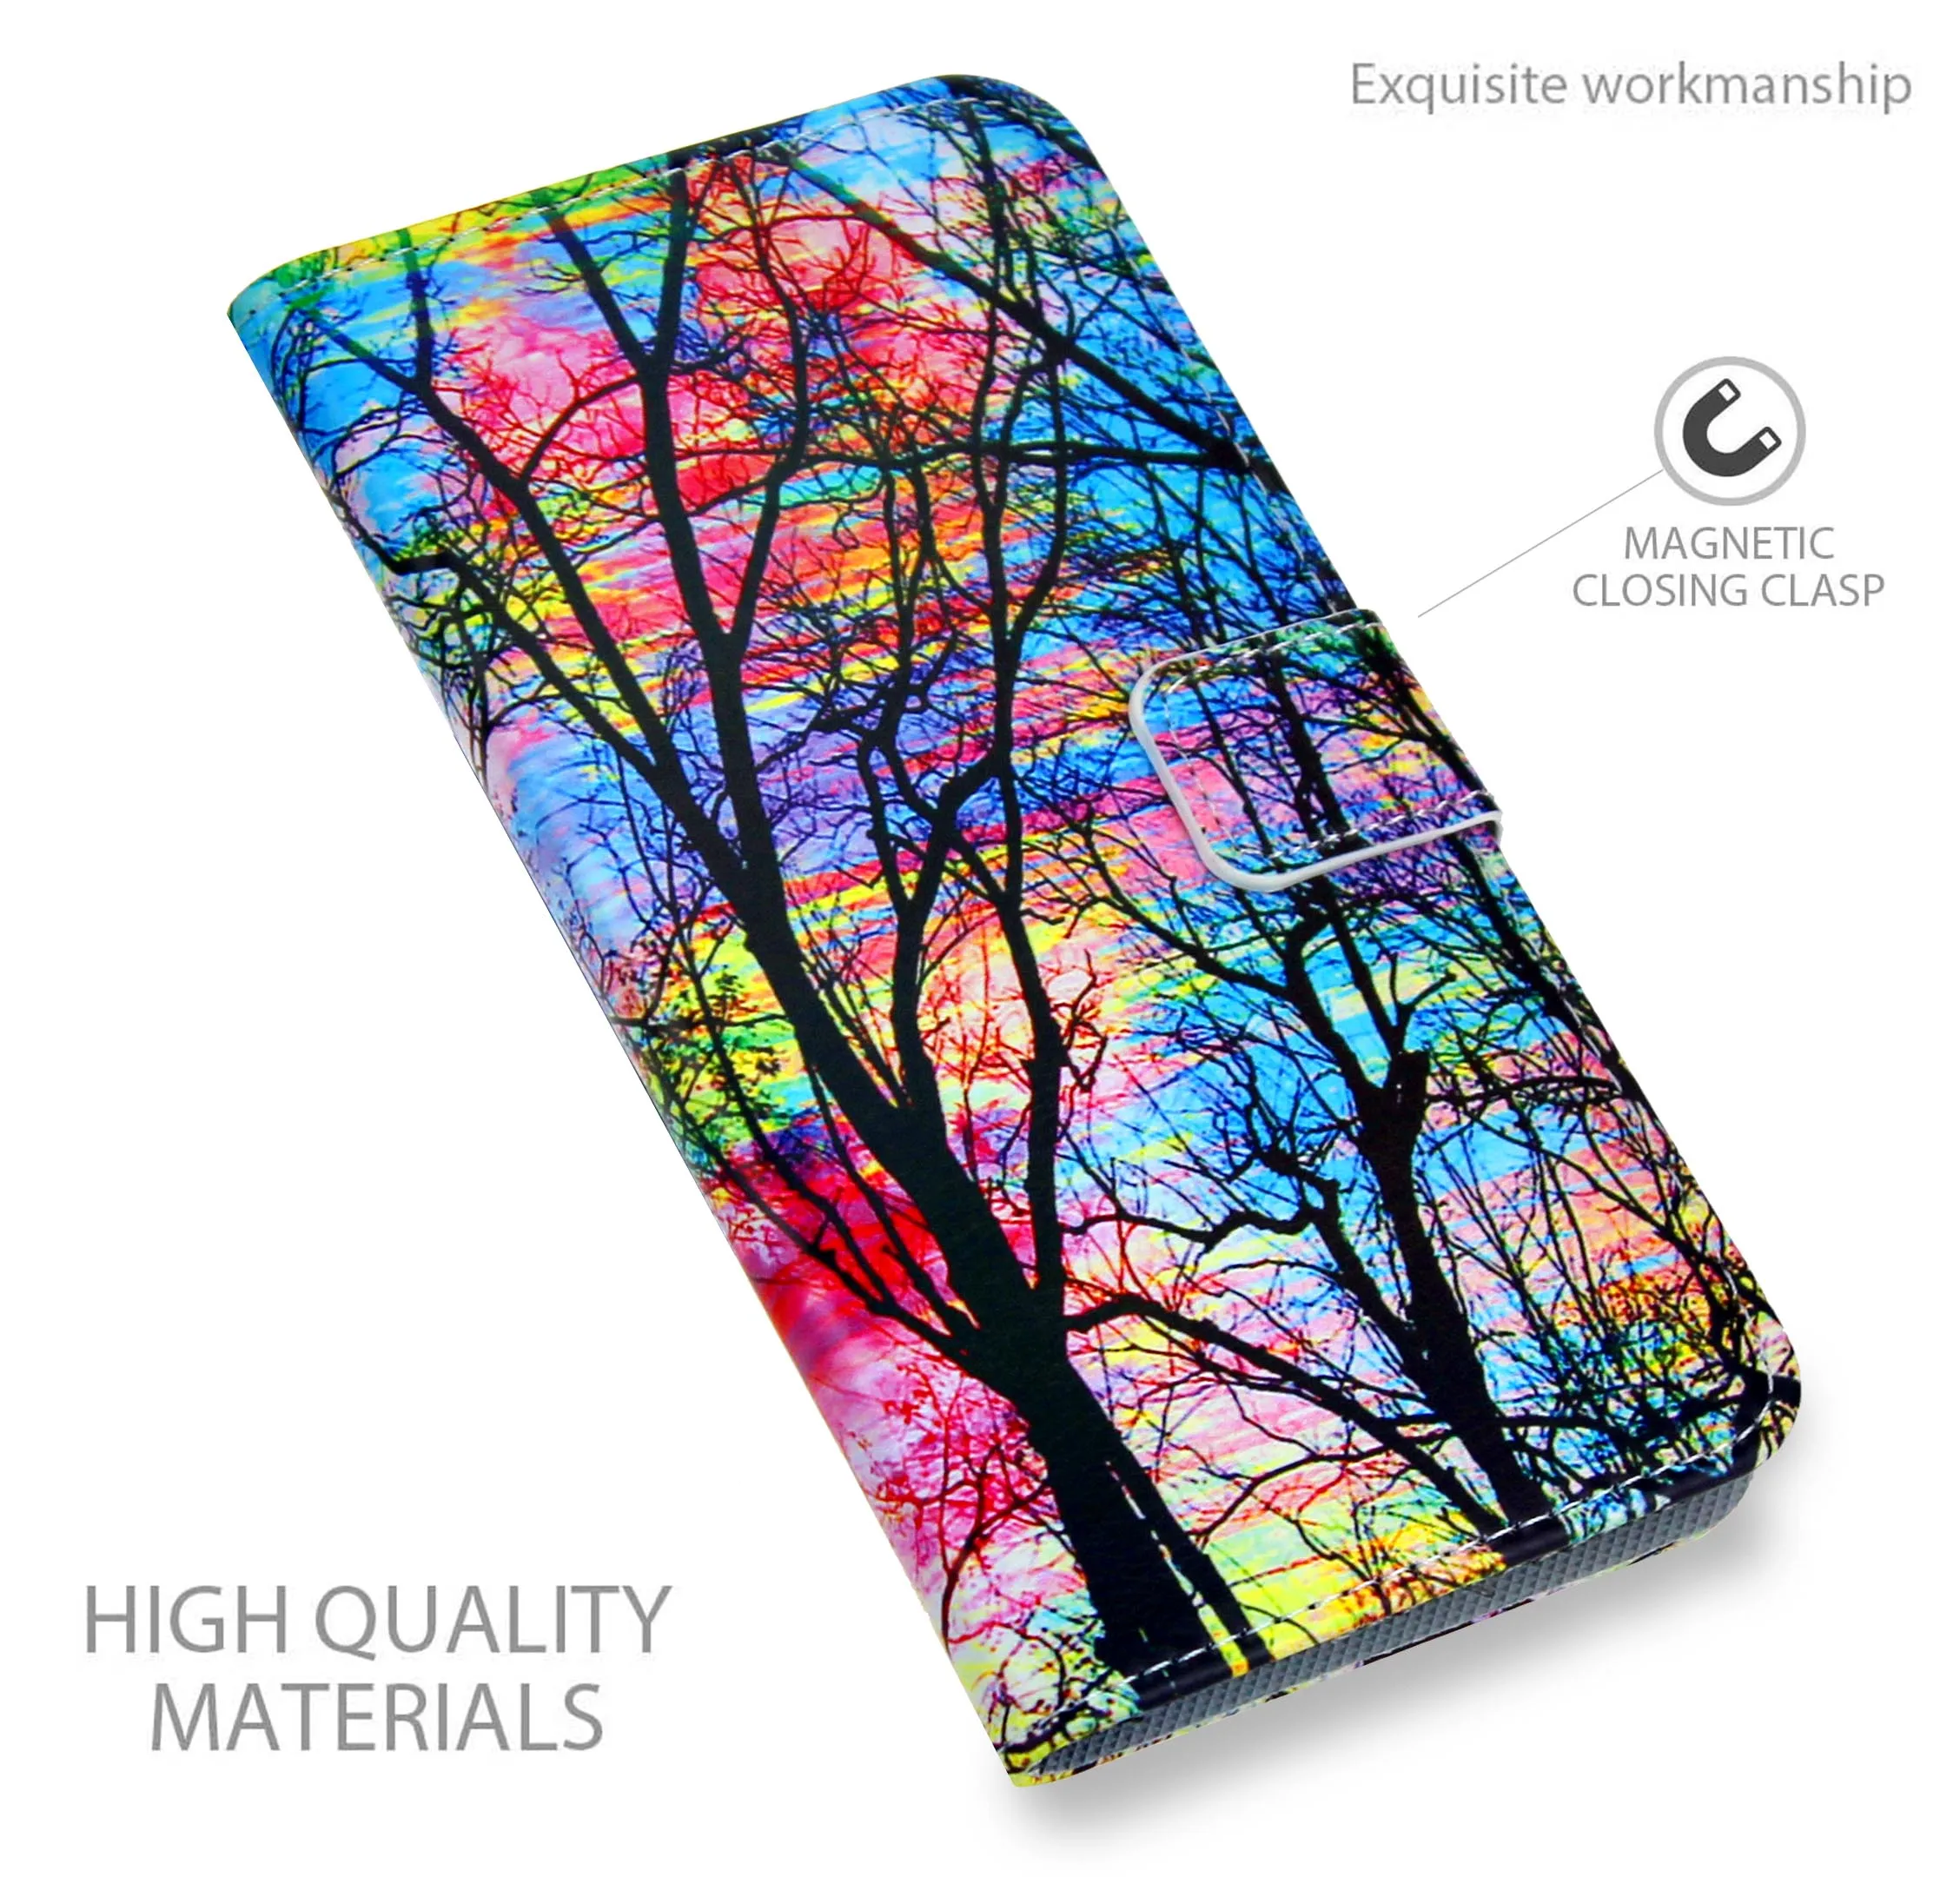 Painted Wallet Leather Case Pocket Cover For Meizu 15 16S 16X M15 M2 M3 M5 M5C M5S M6 M6S M6T A5 Mini Lite Note 2 3 6 8 9 X8 C9